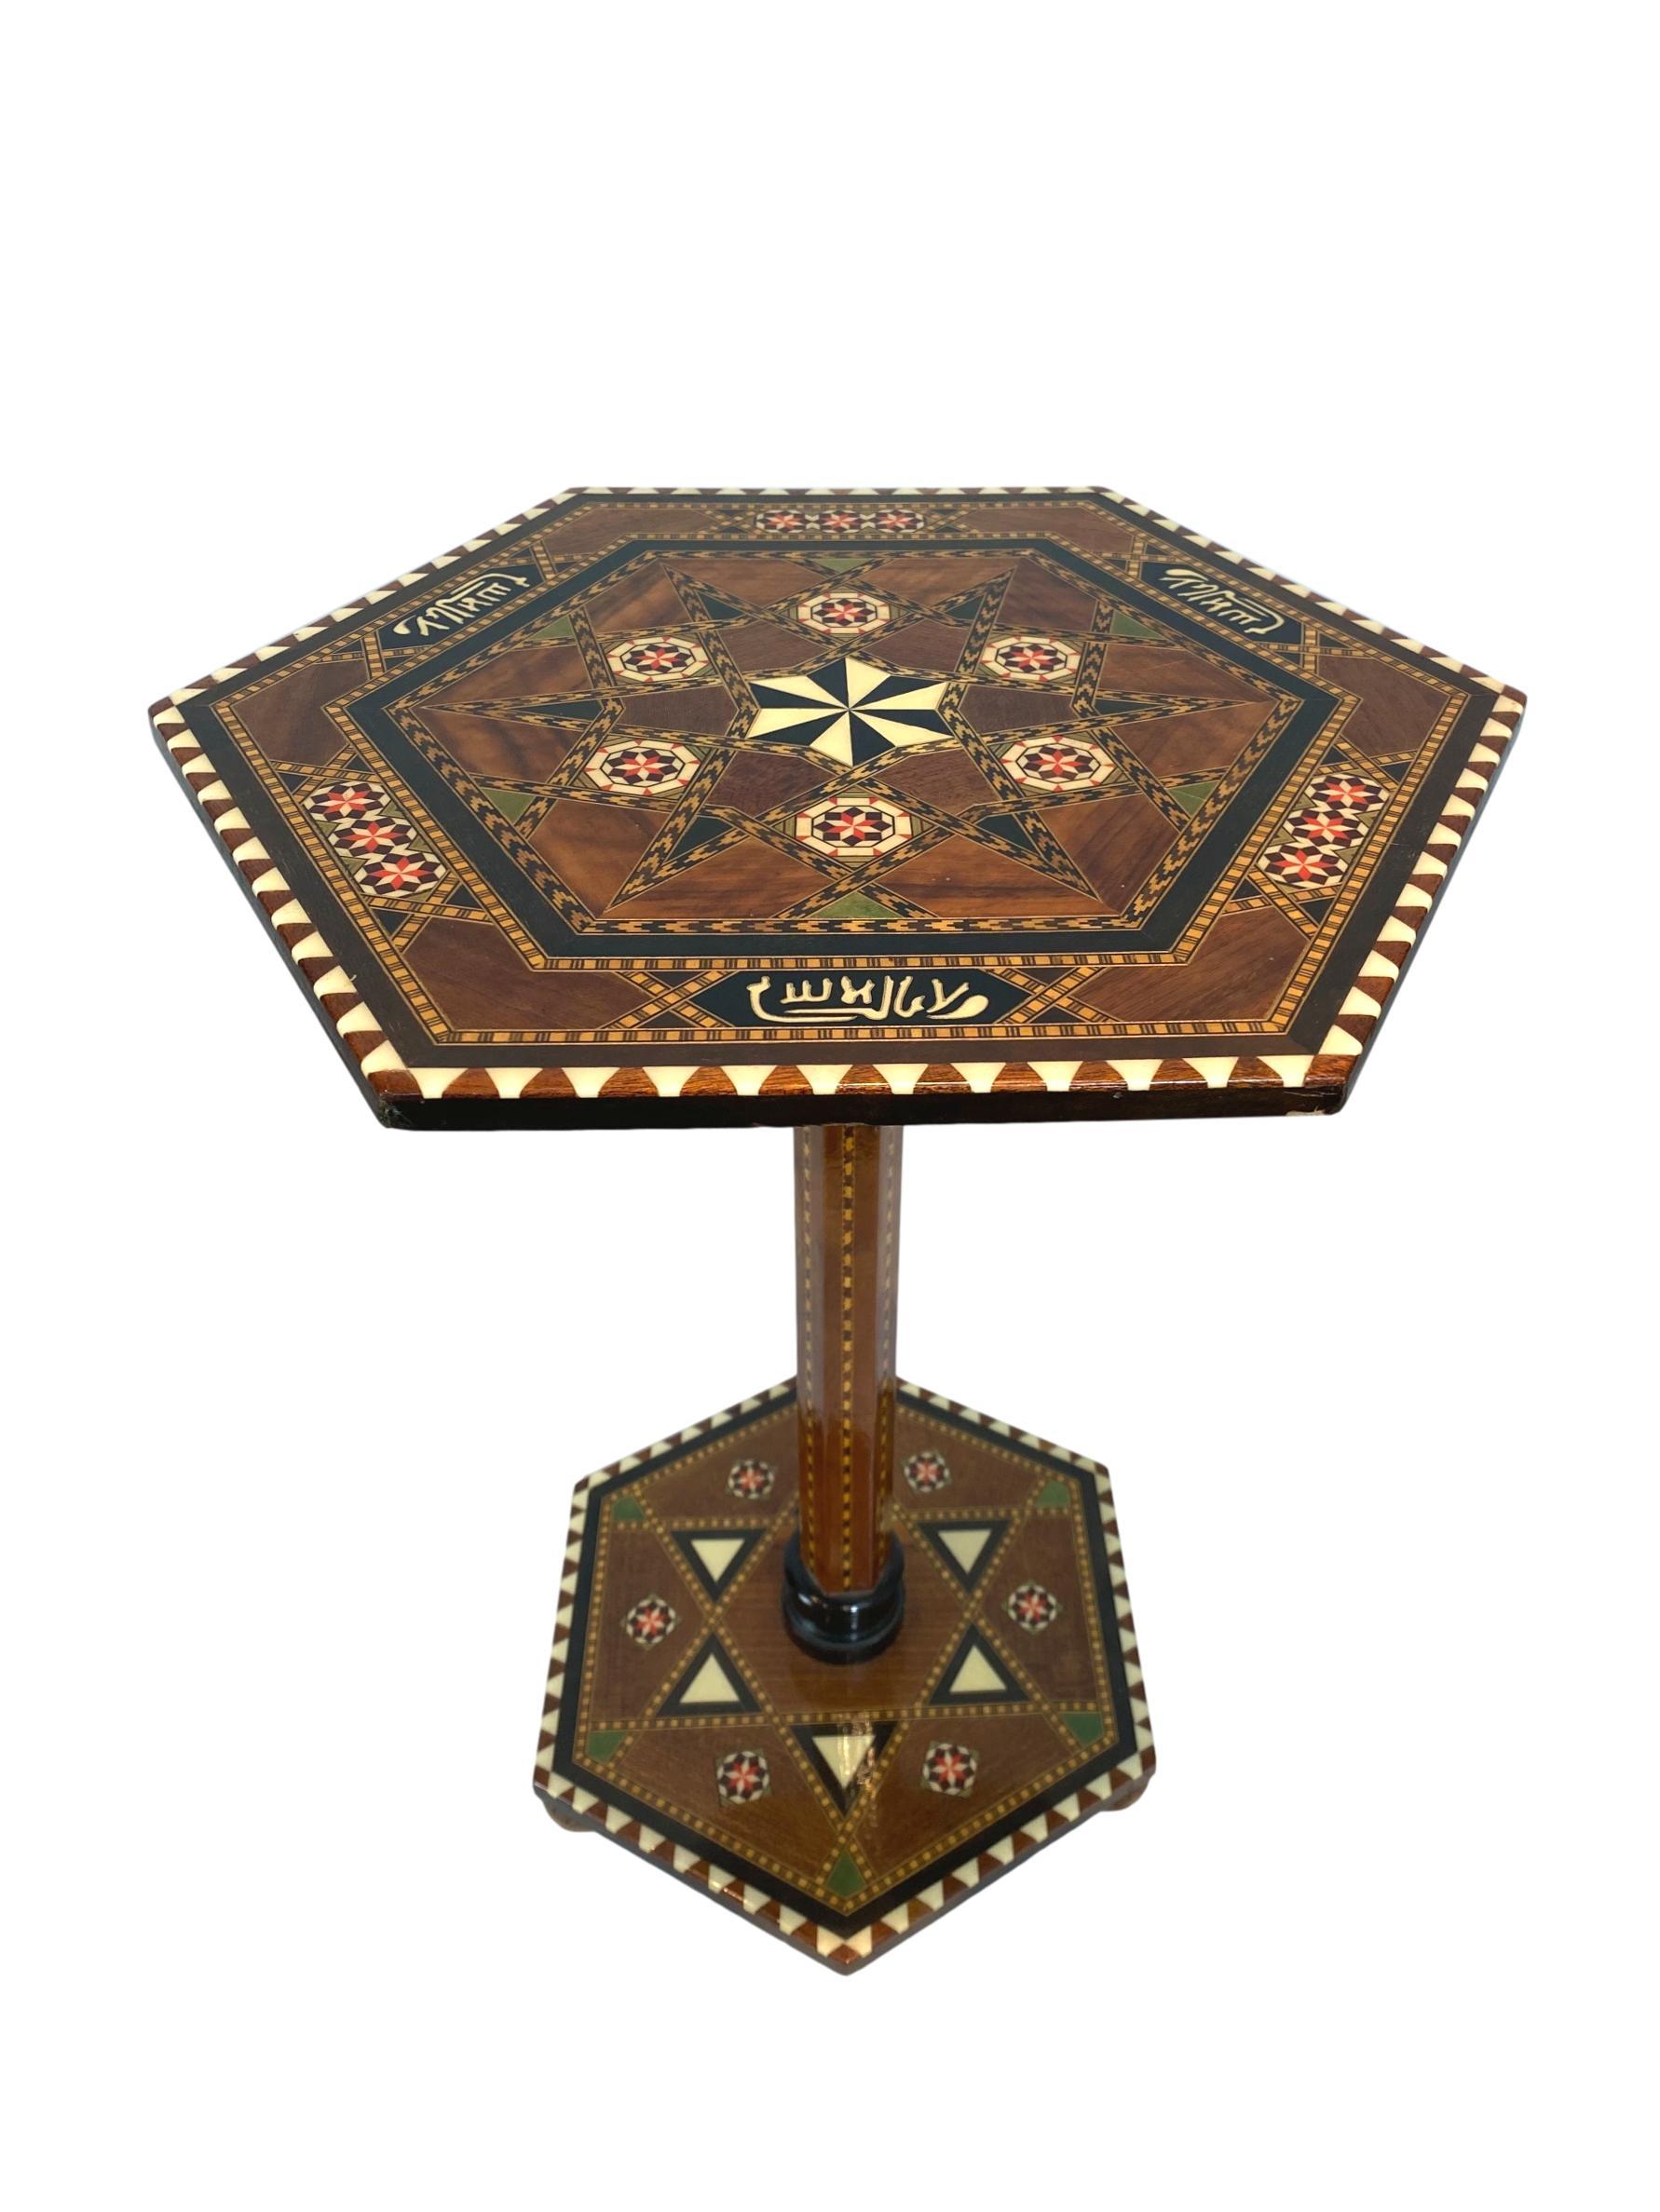 A Syrian side table/stand with profuse and exotic detailed Inlays throughout, the top and bottom of hexagonal form, with a central column, on ball feet, circa 1970.